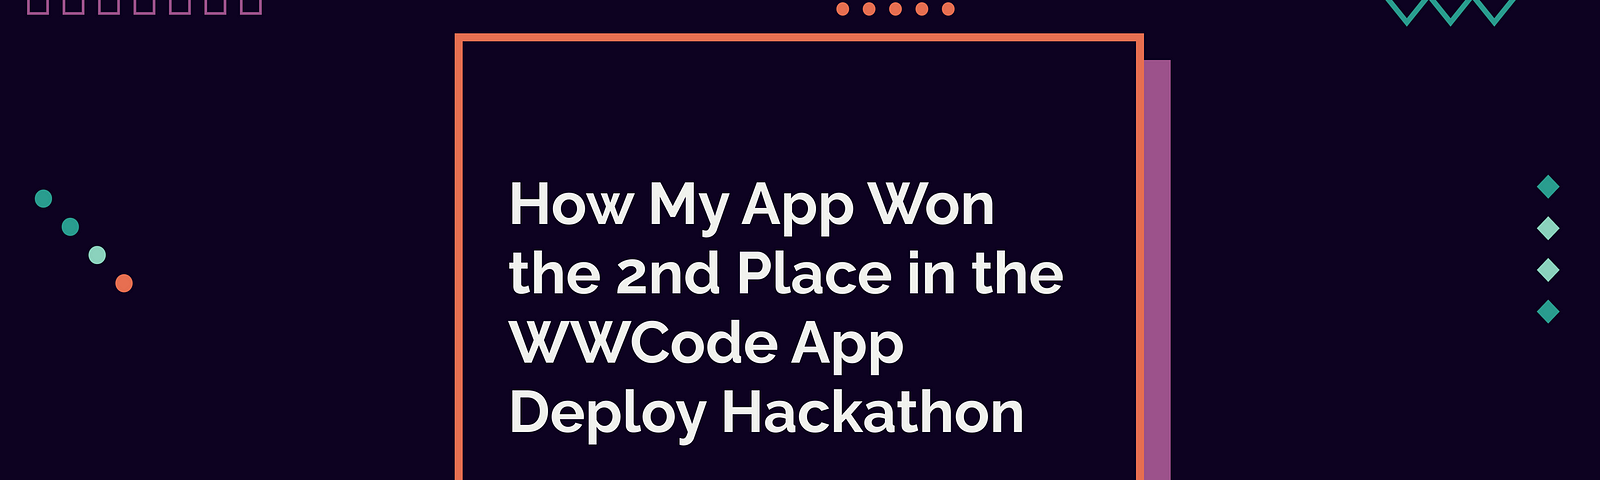 How my app won the 2nd place in the WWCode App Deploy Hackathon